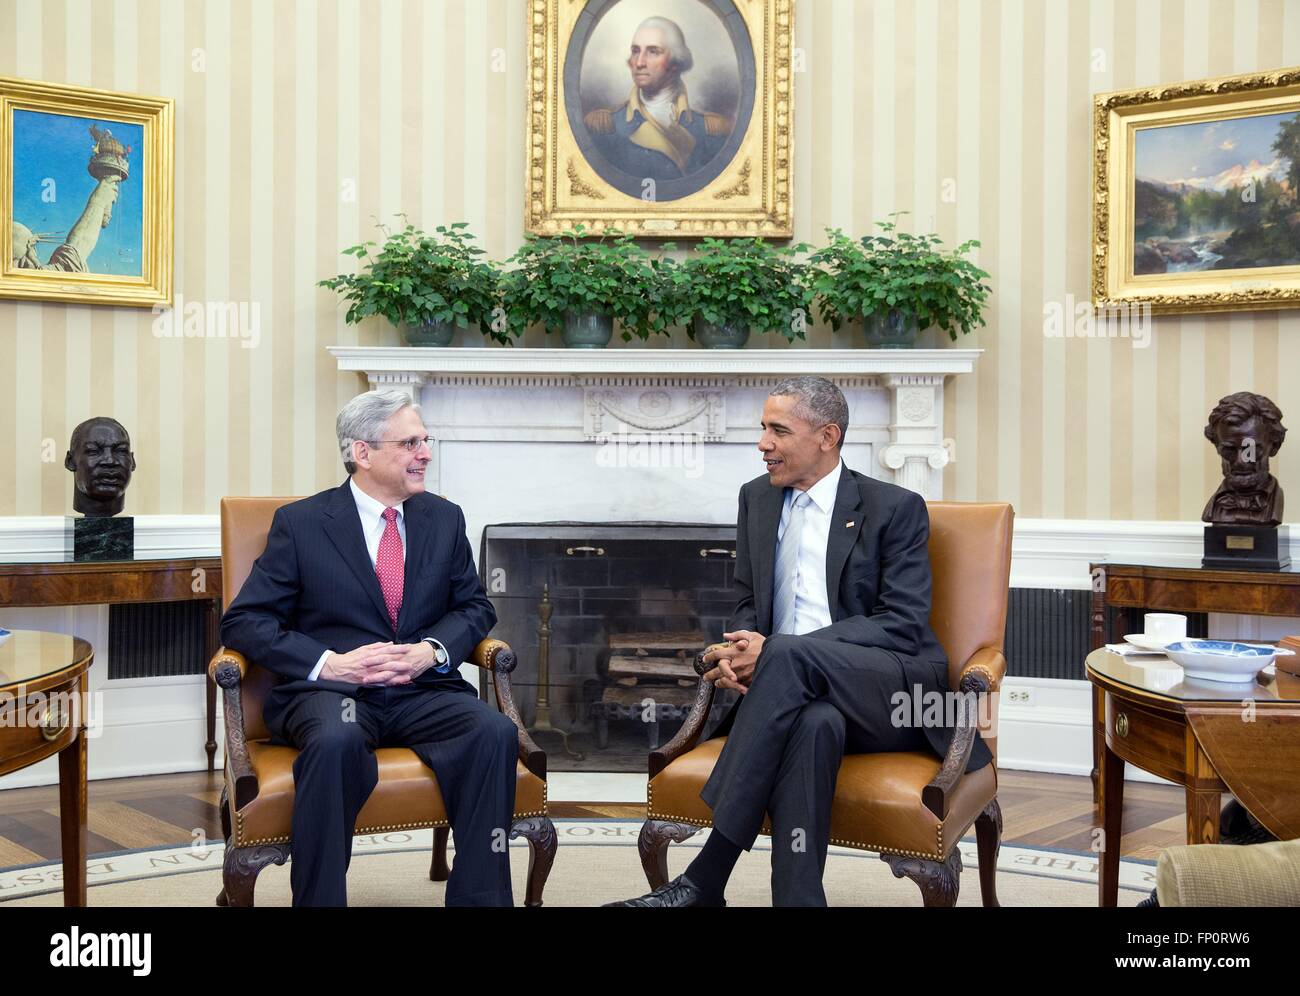 Washington DC, USA. 16th March, 2016. U.S. President Barack Obama meets with Chief Judge Merrick B. Garland in the Oval Office of the White House March 9, 2016 in Washington, DC. Obama announced Garland as his nominee for the United States Supreme Court on March 16th. Stock Photo